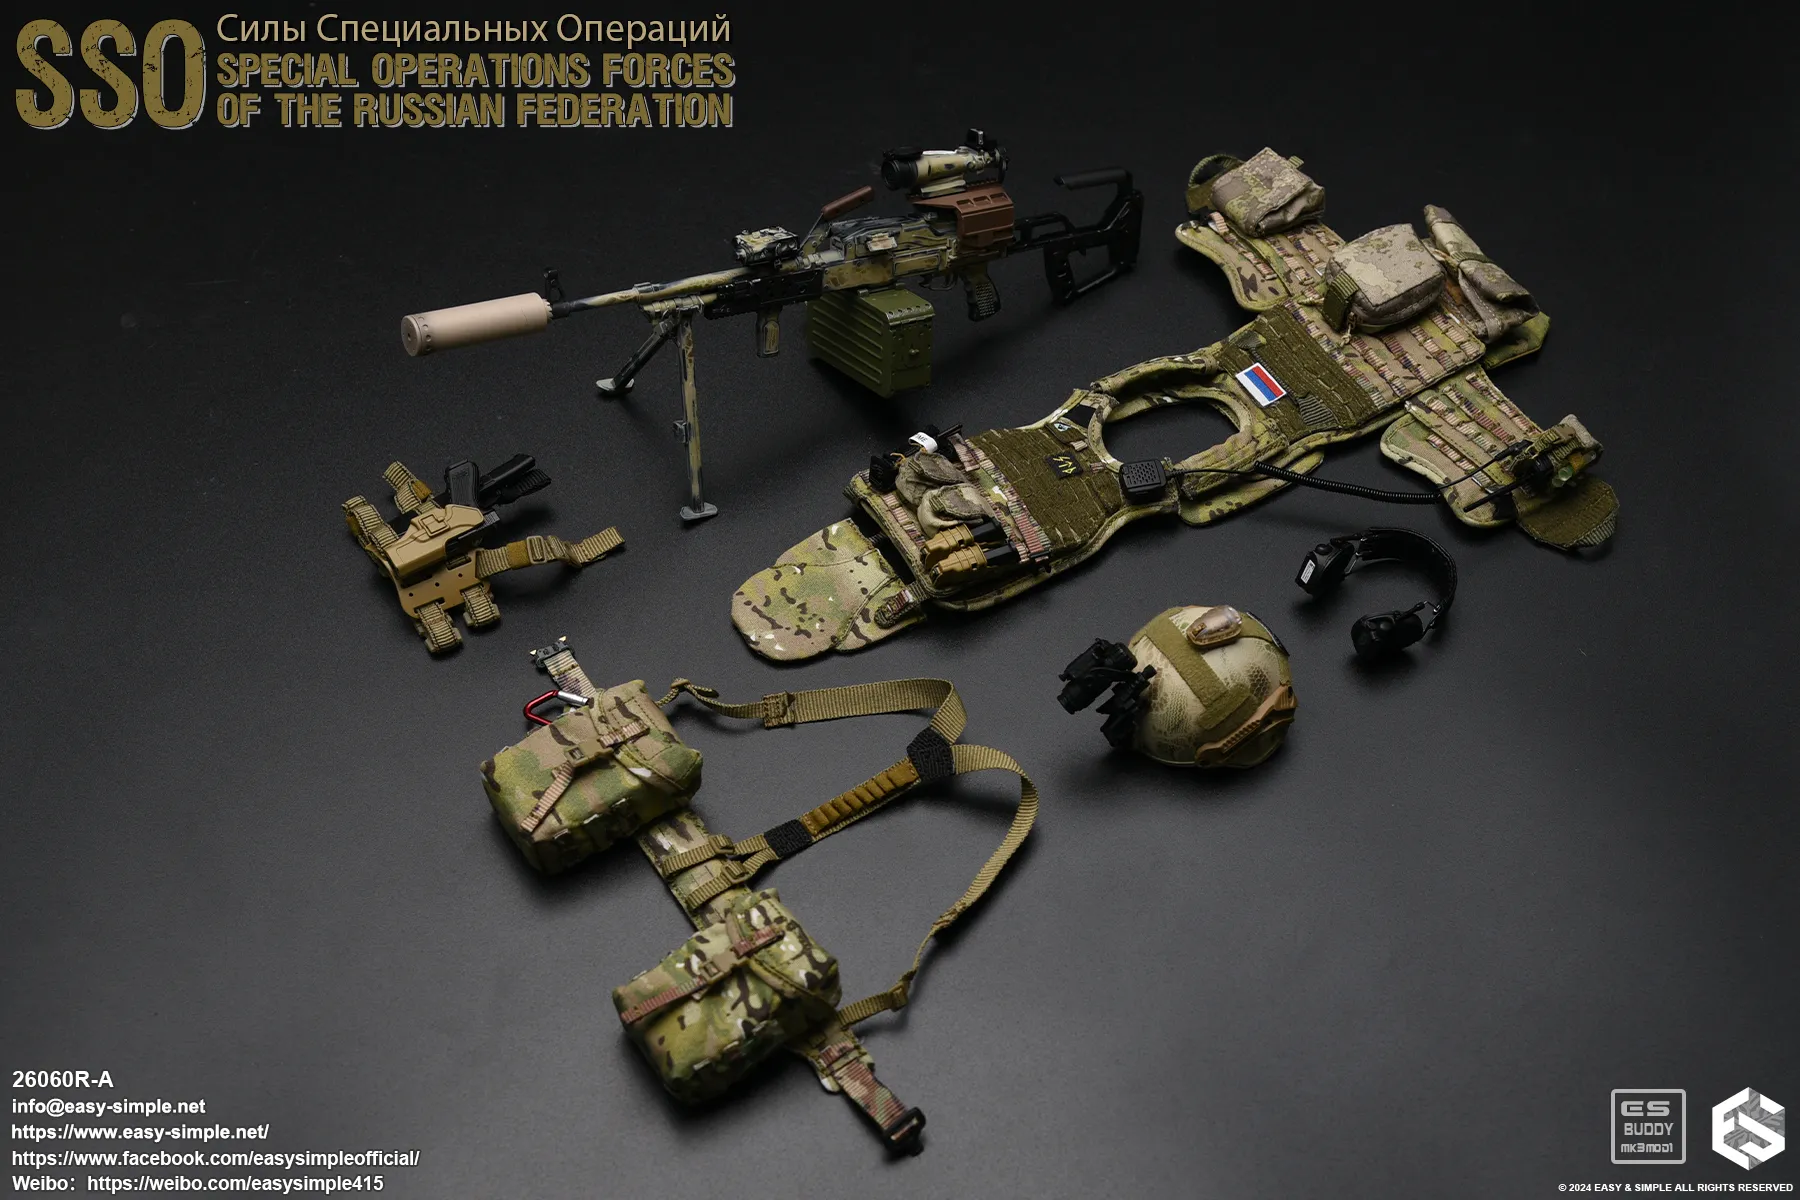 male - NEW PRODUCT: Easy&Simple 26060R-A Russian Special Operations Forces (SSO) Format,webp